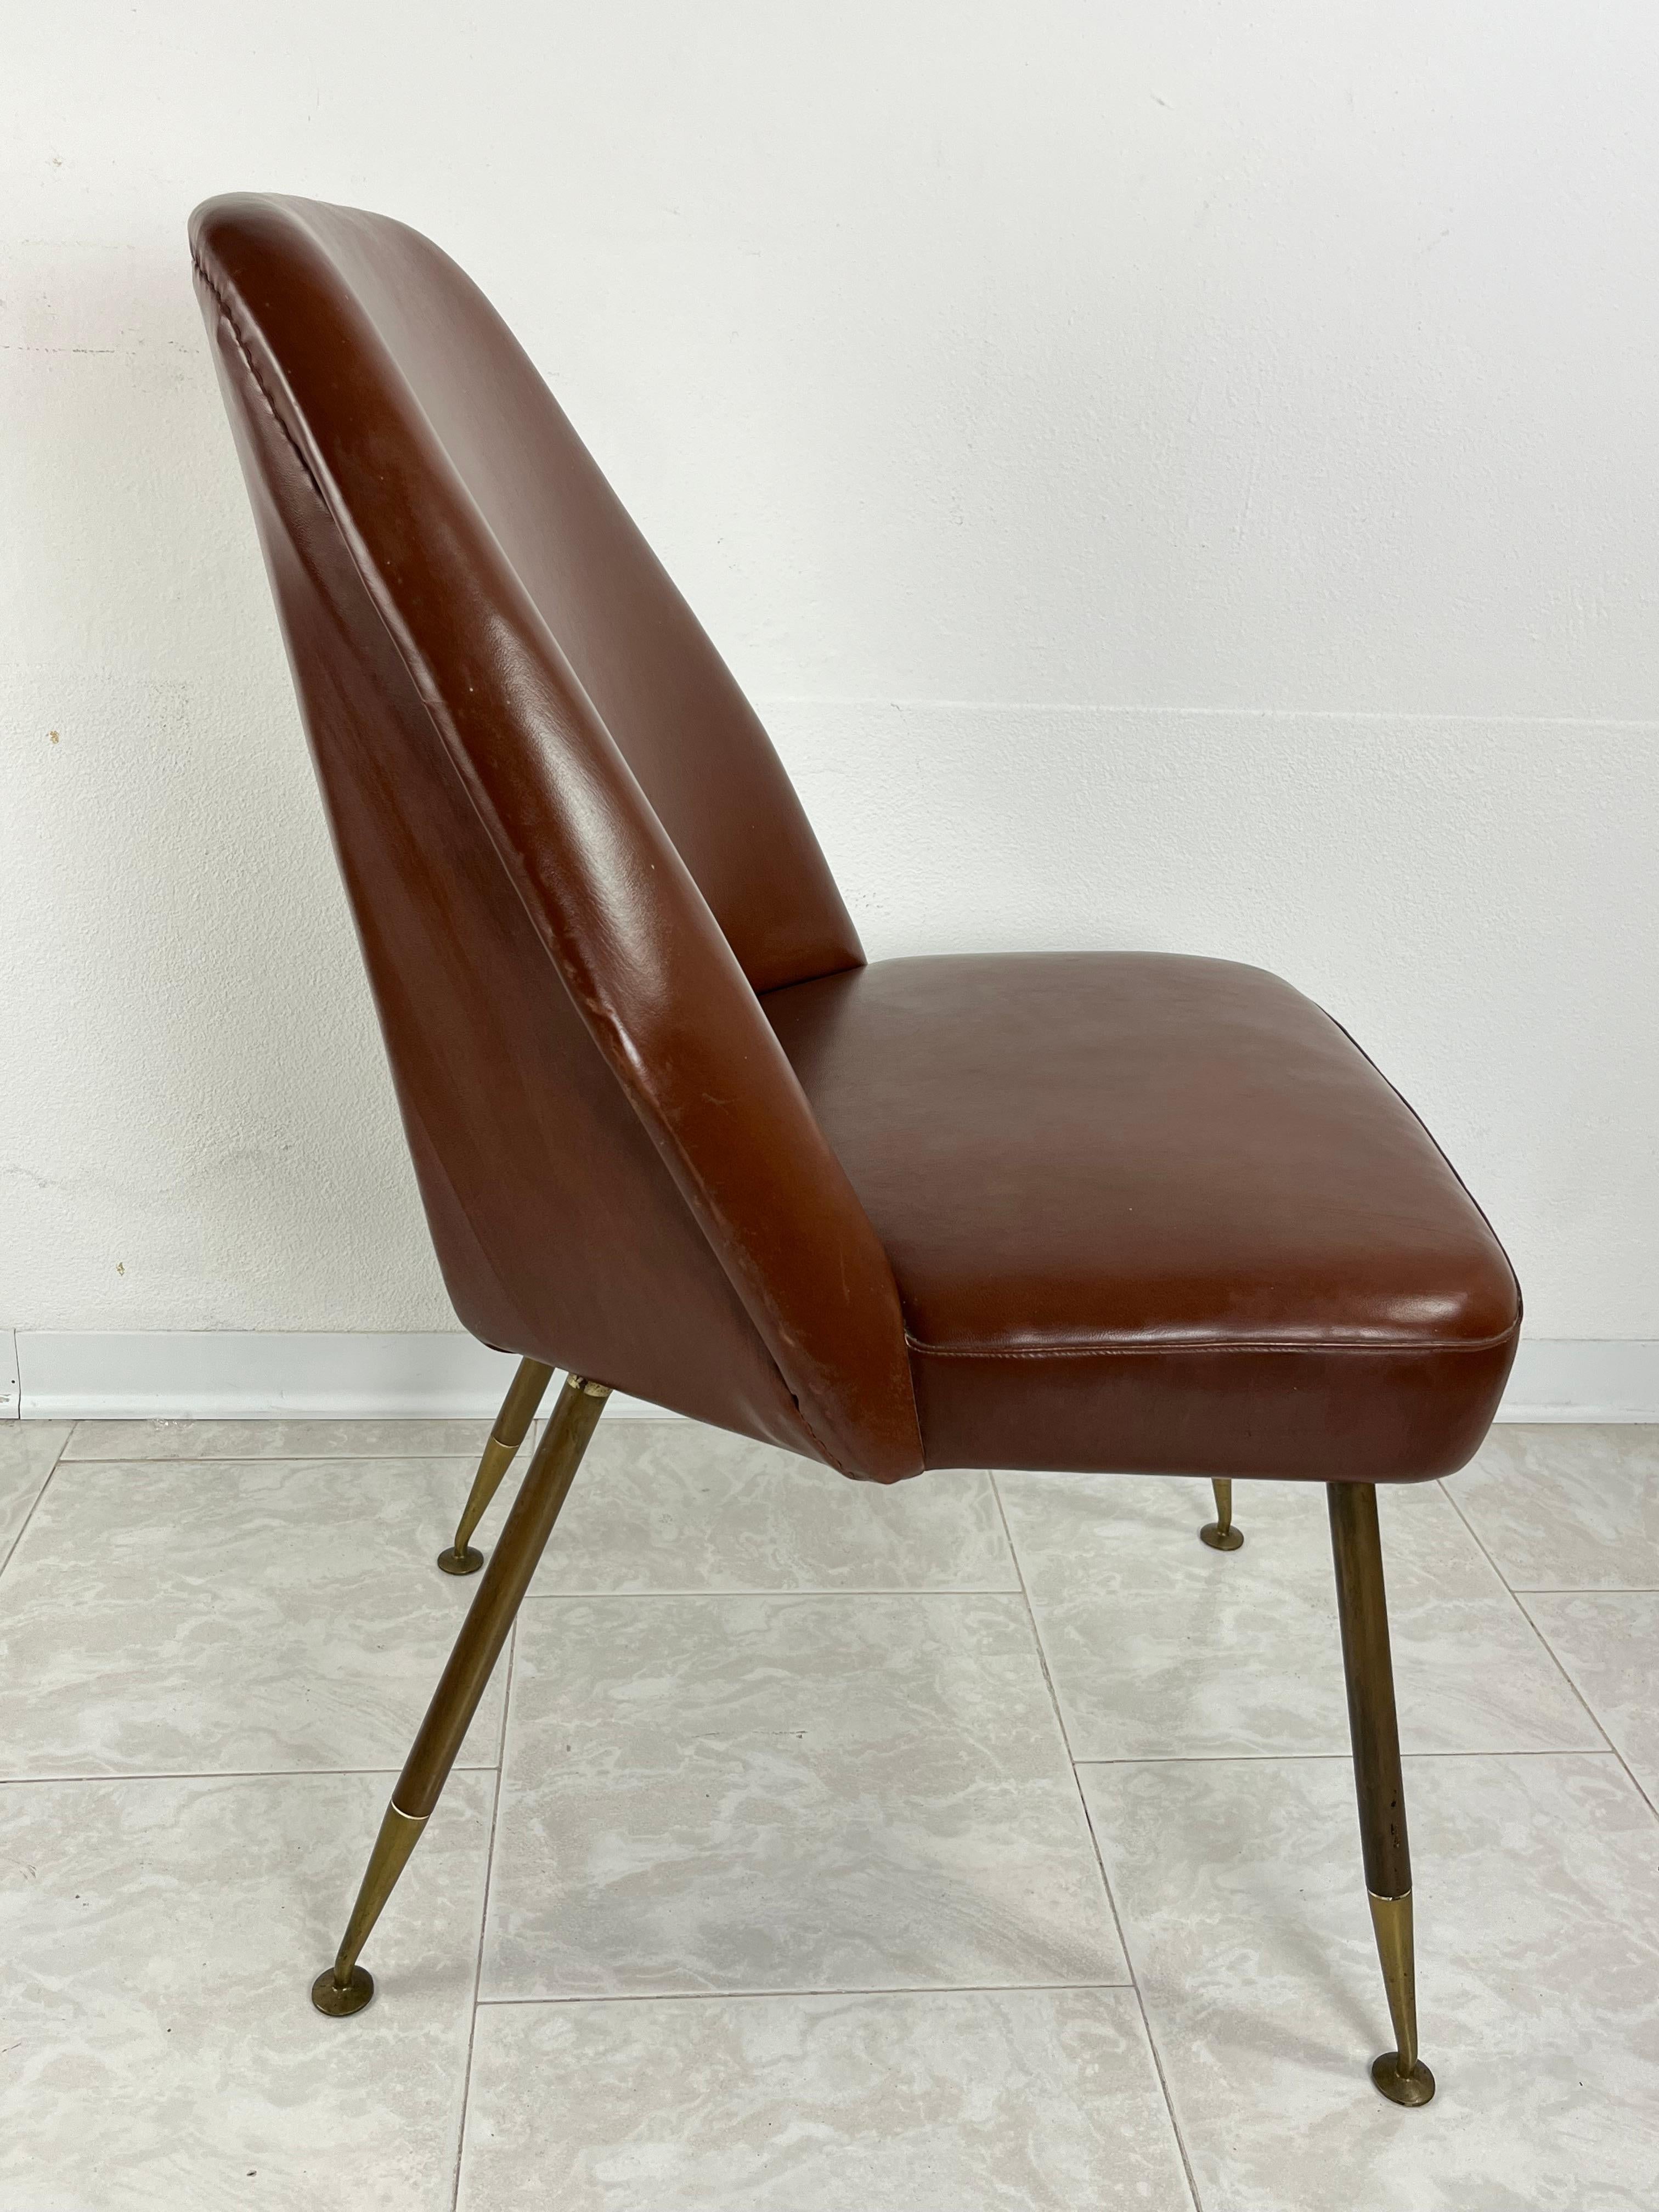 Mid-Century Campanula Model Chair By Carlo Pagani For Arflex 1952 In Good Condition For Sale In Palermo, IT